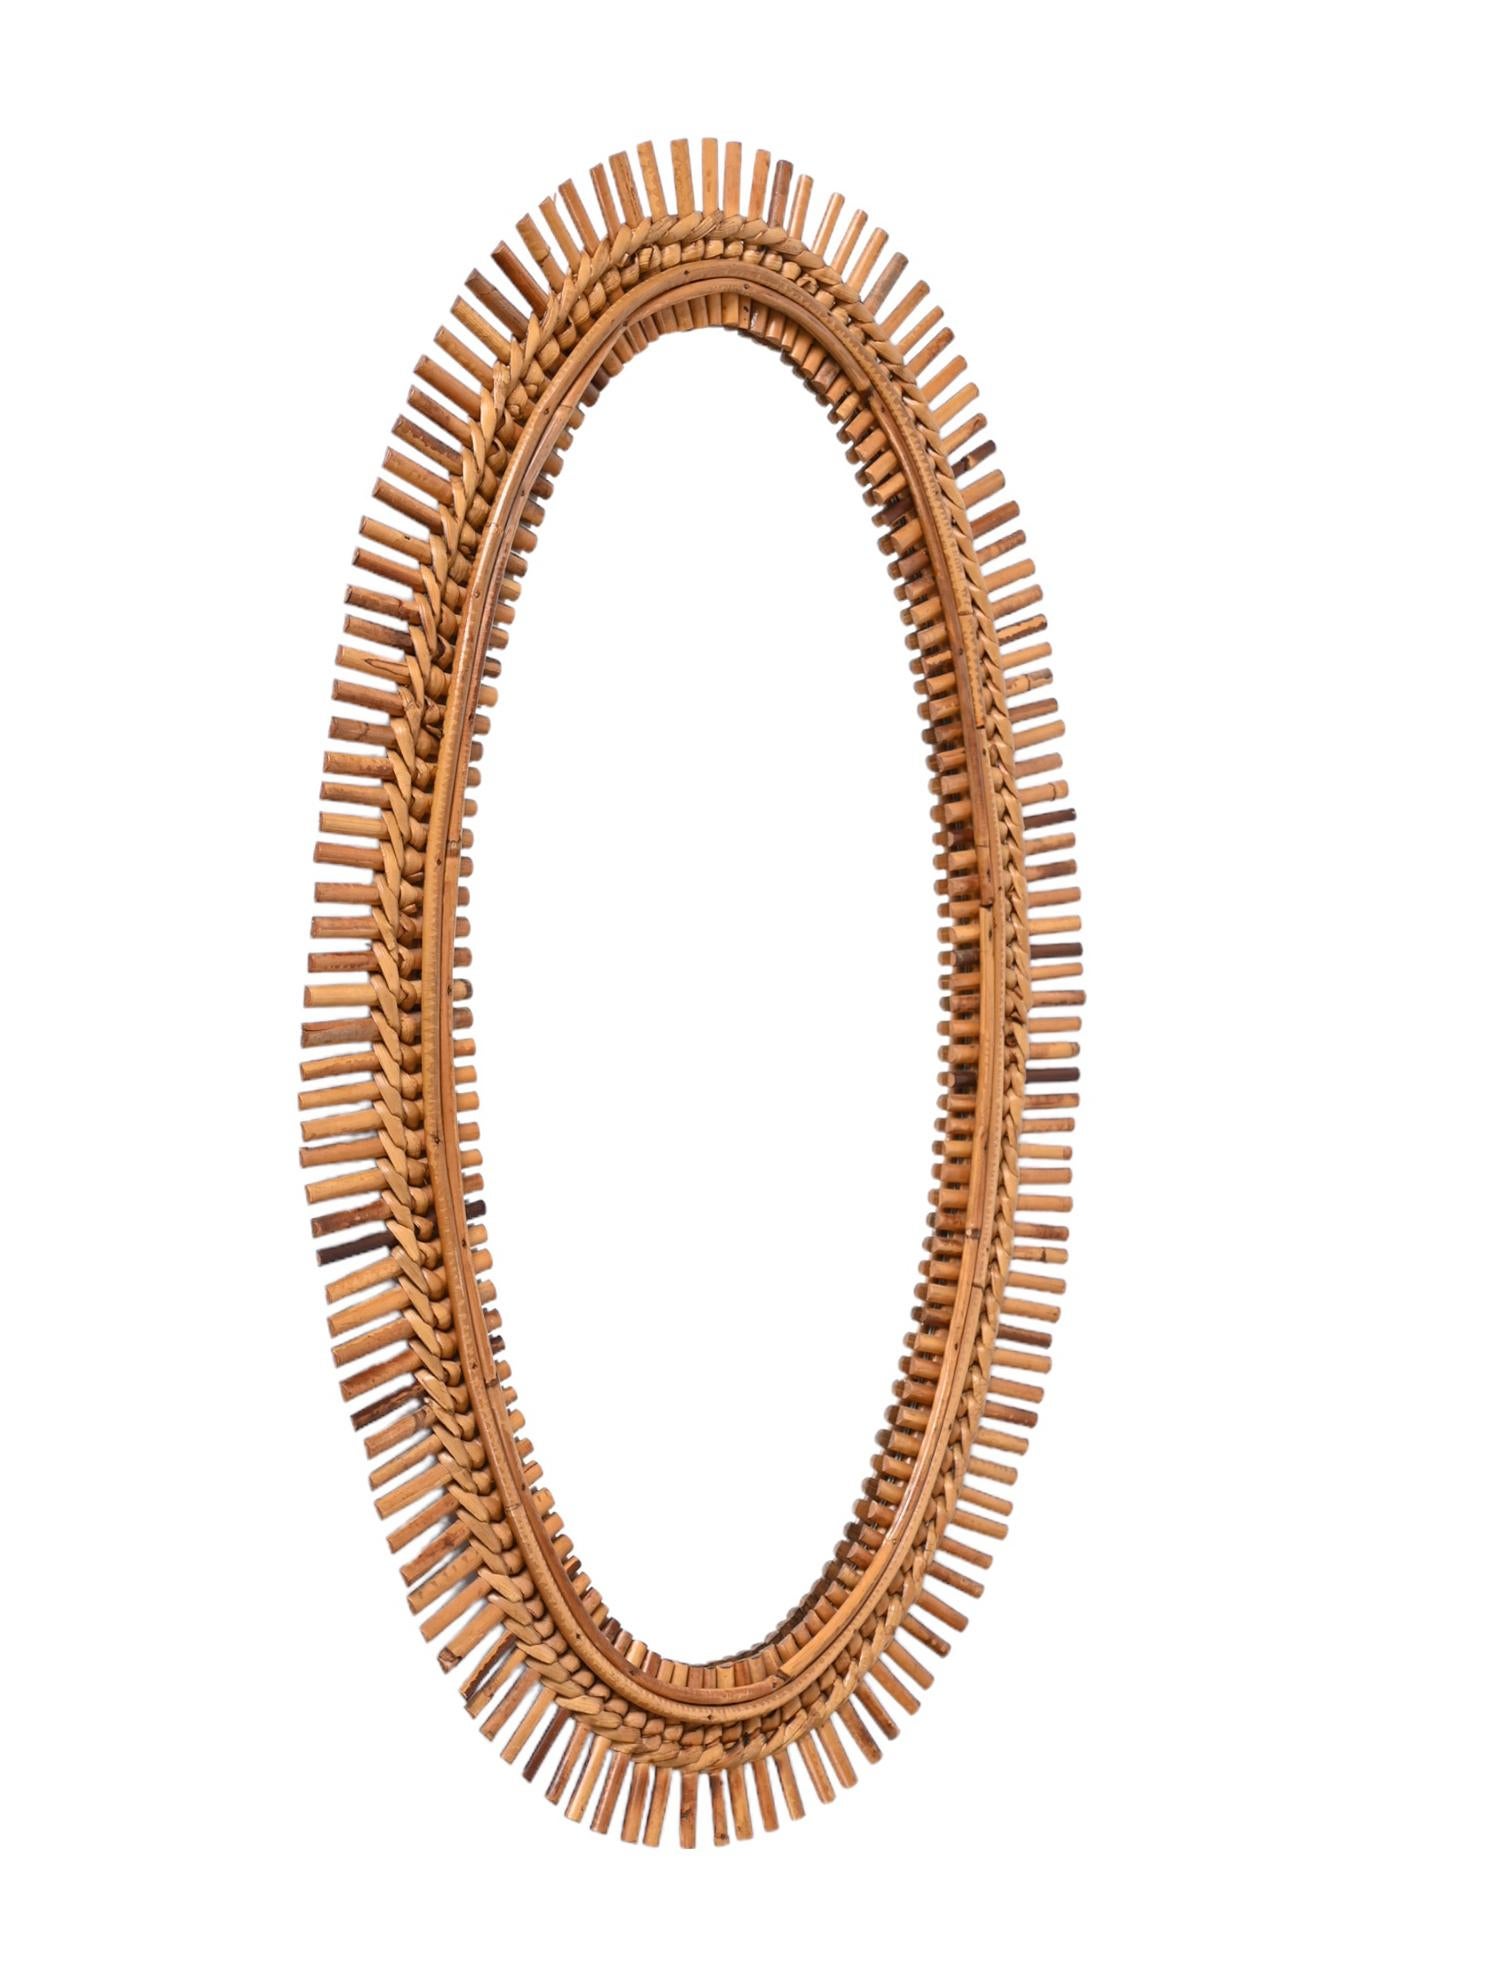 Midcentury French Riviera Oval Wall Mirror with Bamboo and Rattan Frame, 1960s 3